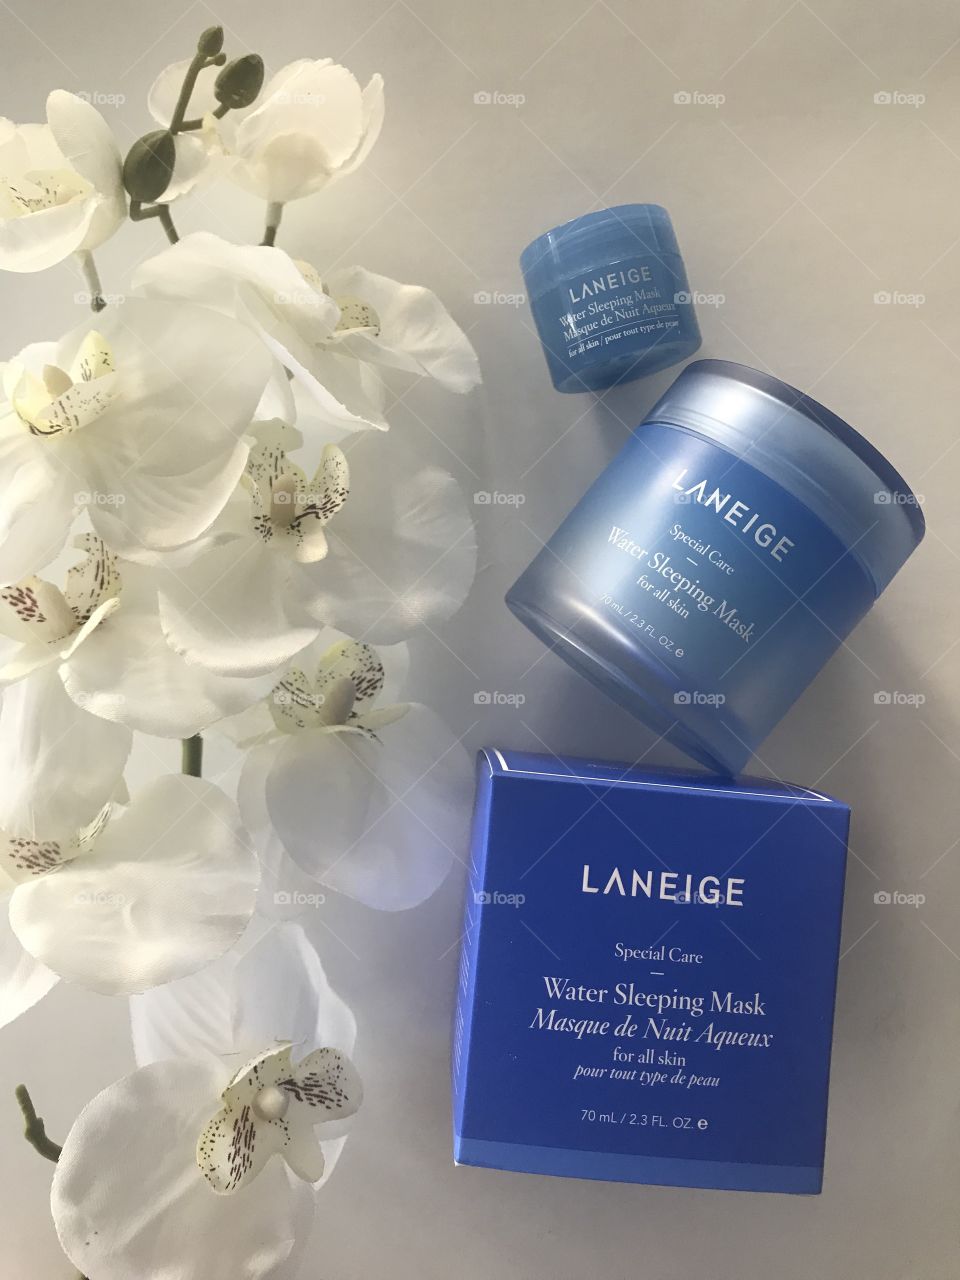 Water Sleeping Mask Skincare by Laneige. Skincare is important and this photo contains flowers that makes the user feel natural. 